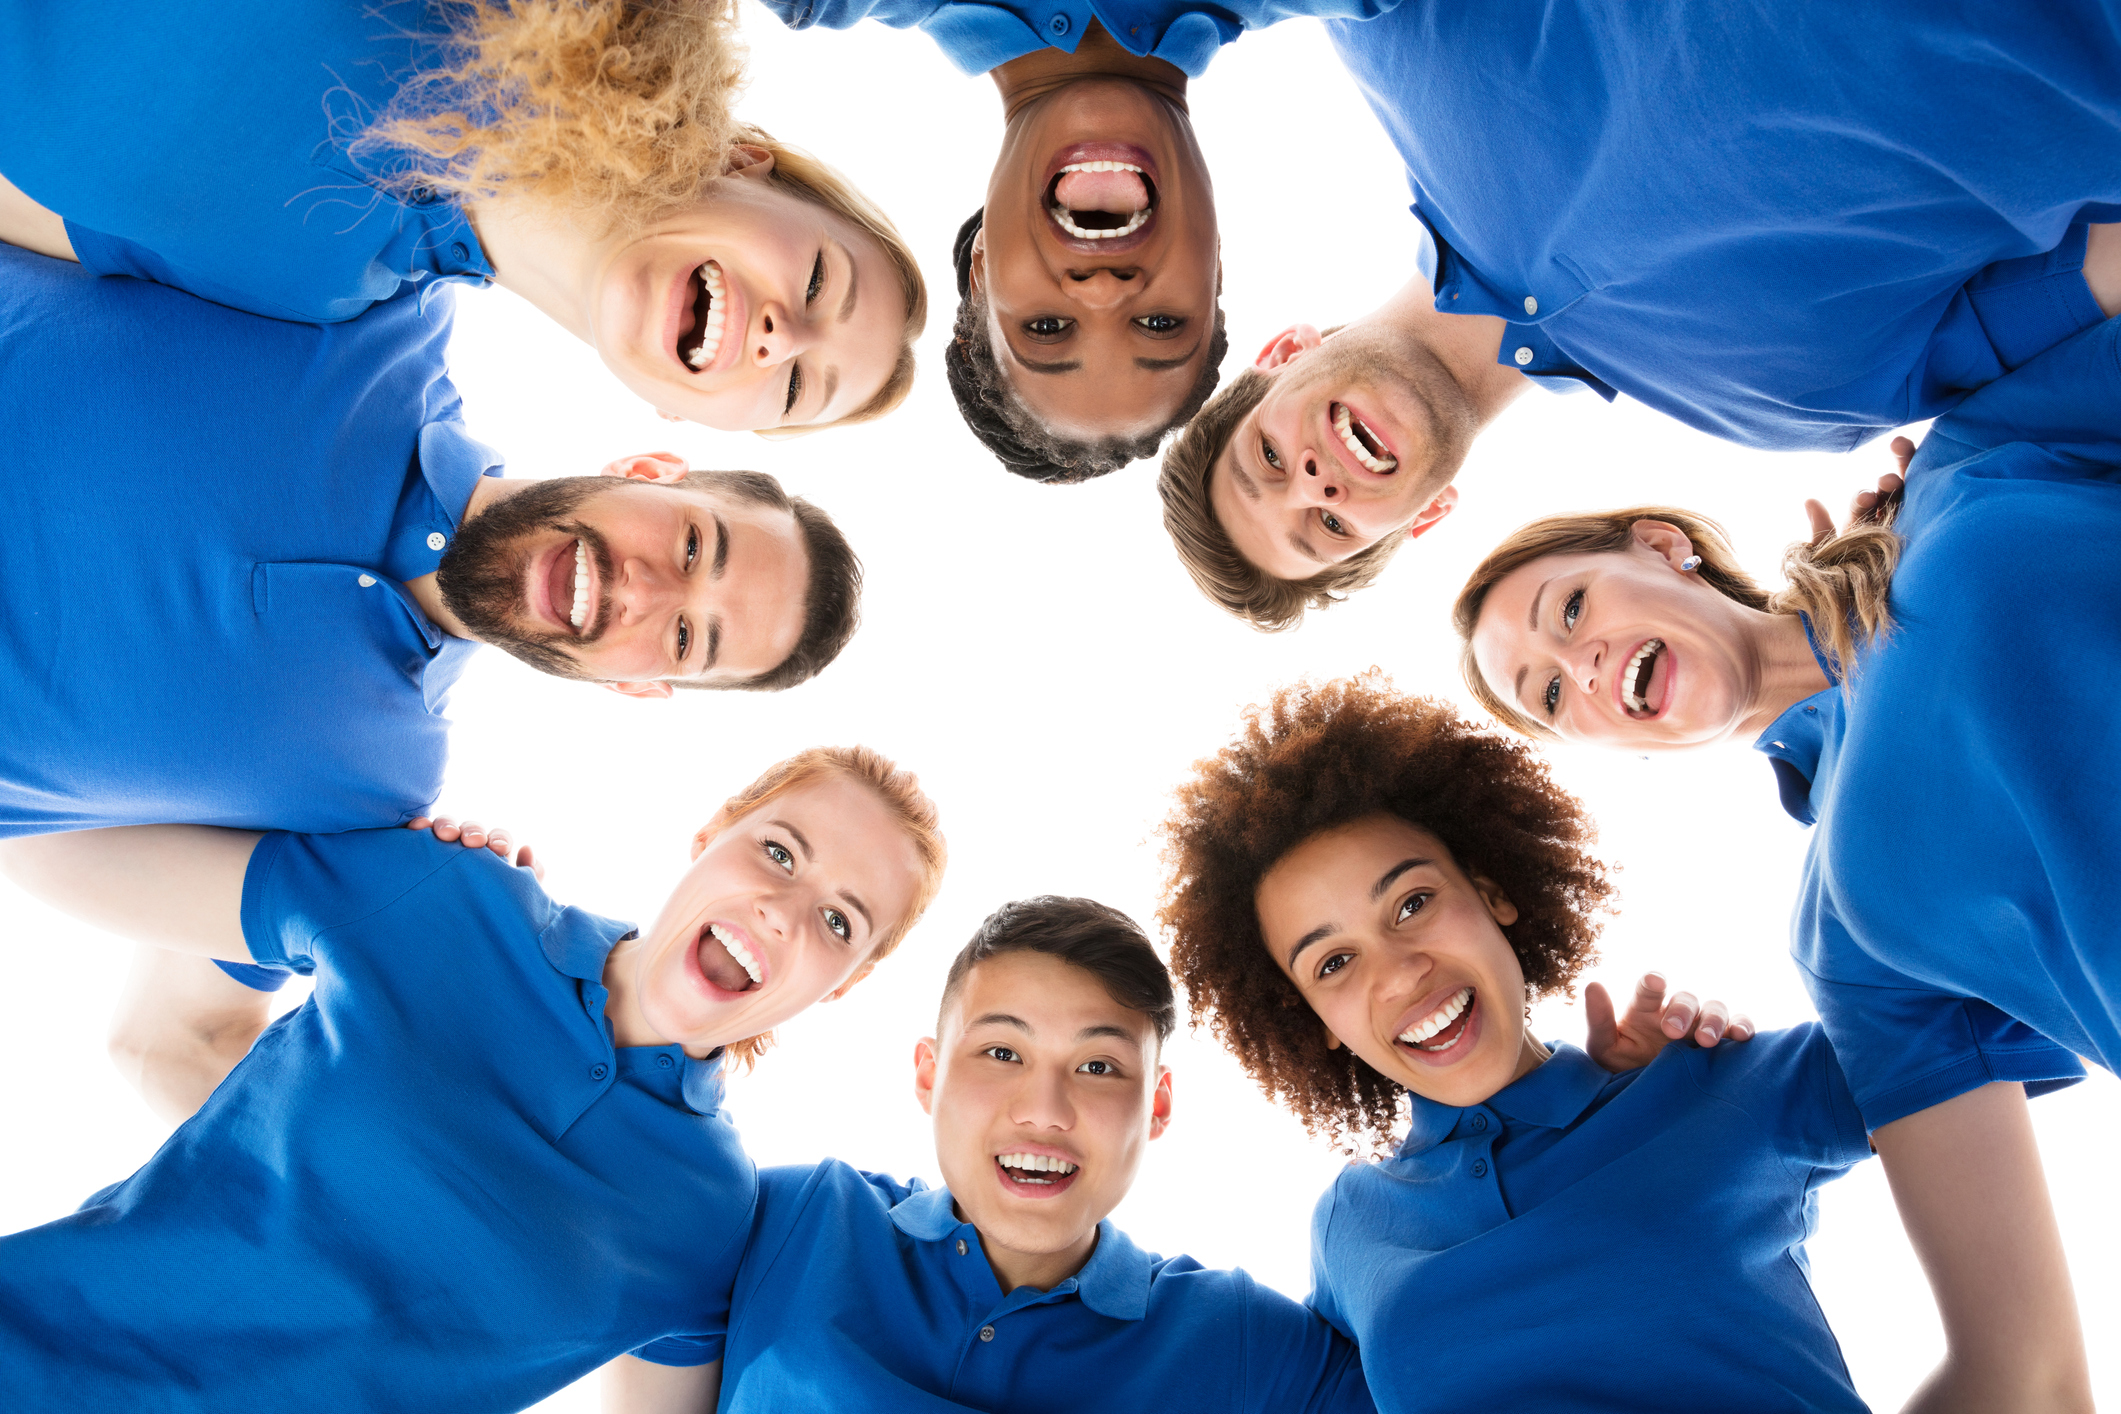 Group Of Smiling Janitors Forming Huddle Against White Background